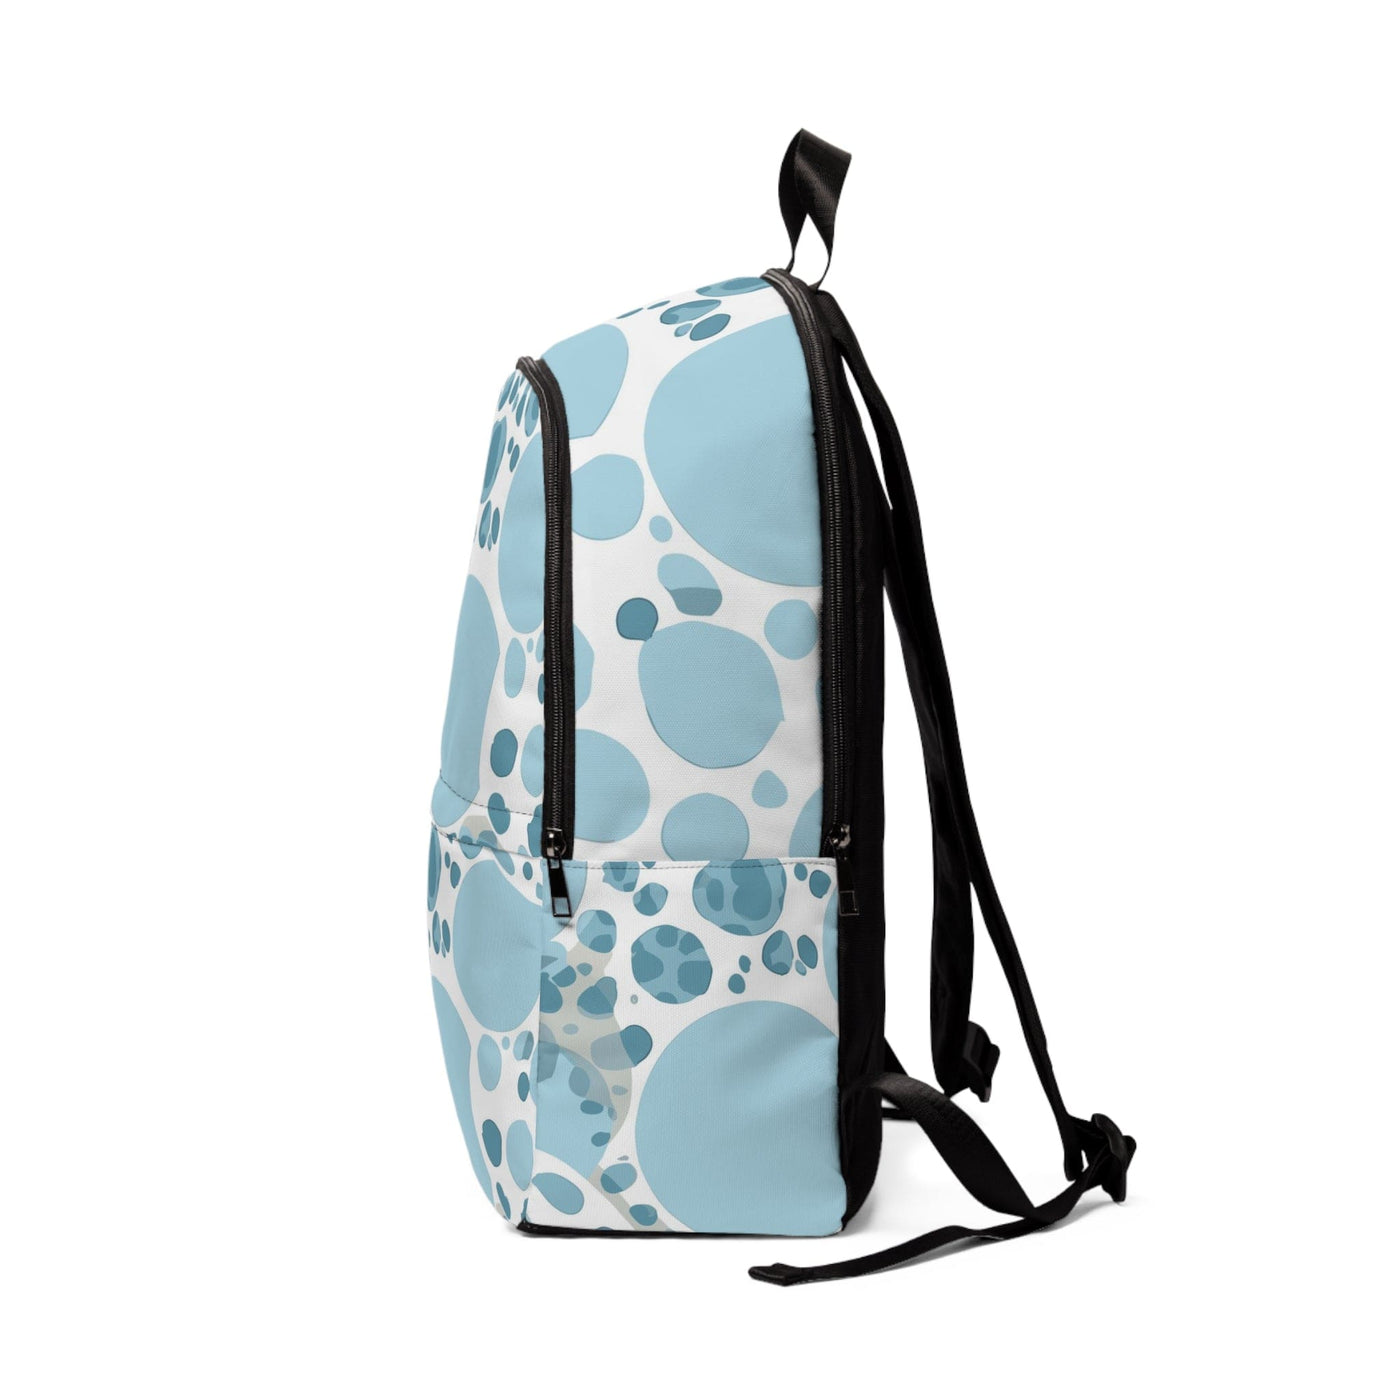 Fashion Backpack Waterproof Blue And White Circular Spotted Illustration - Bags